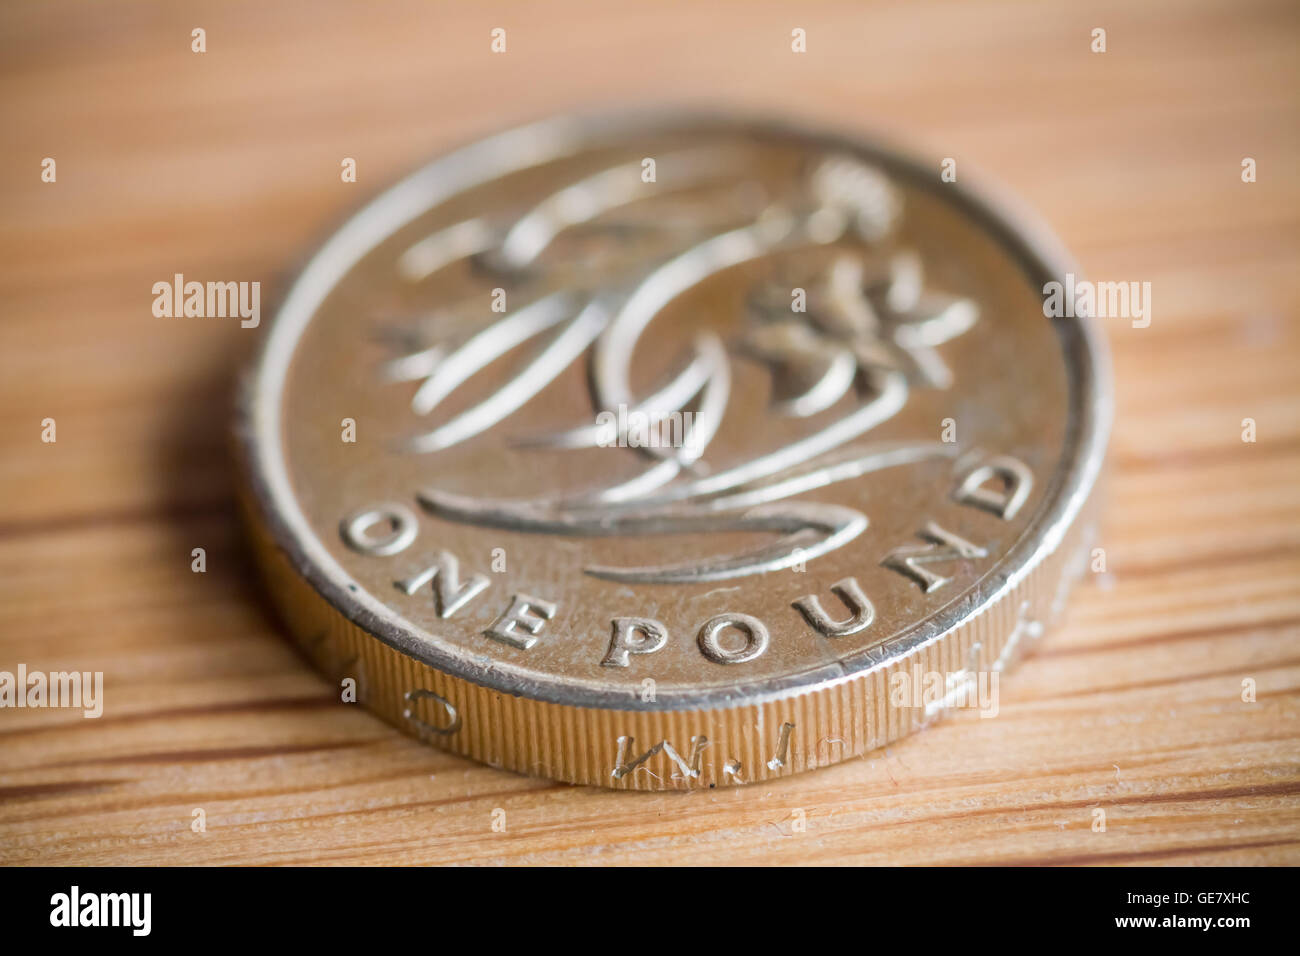 British £1 pound coin sterling currency Stock Photo